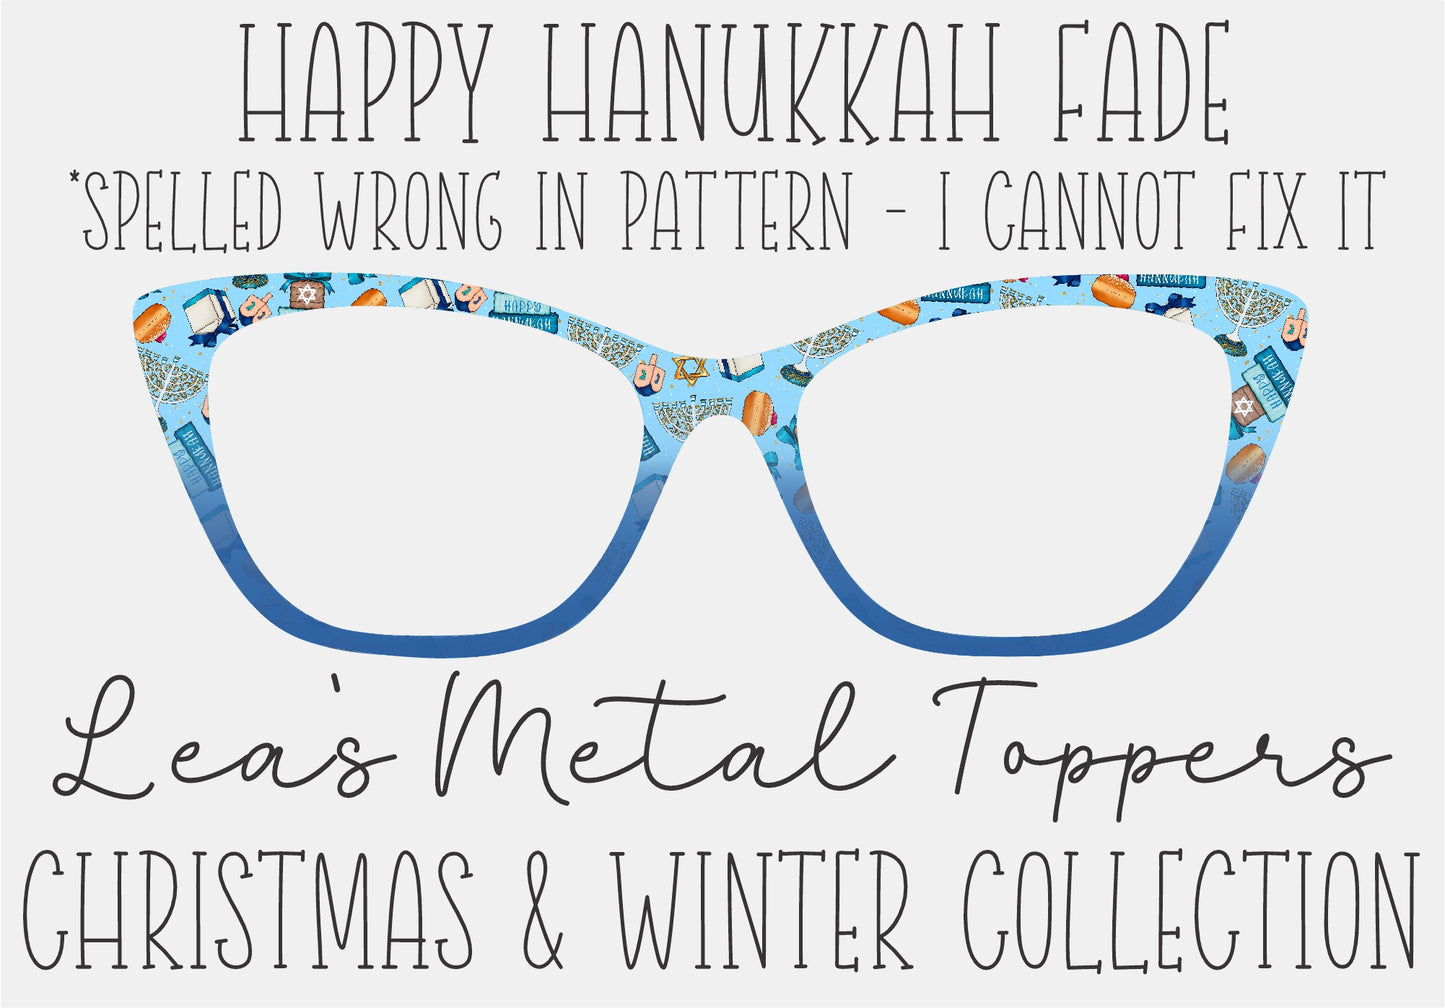 HAPPY HANNUKAH FADE Eyewear Frame Toppers COMES WITH MAGNETS